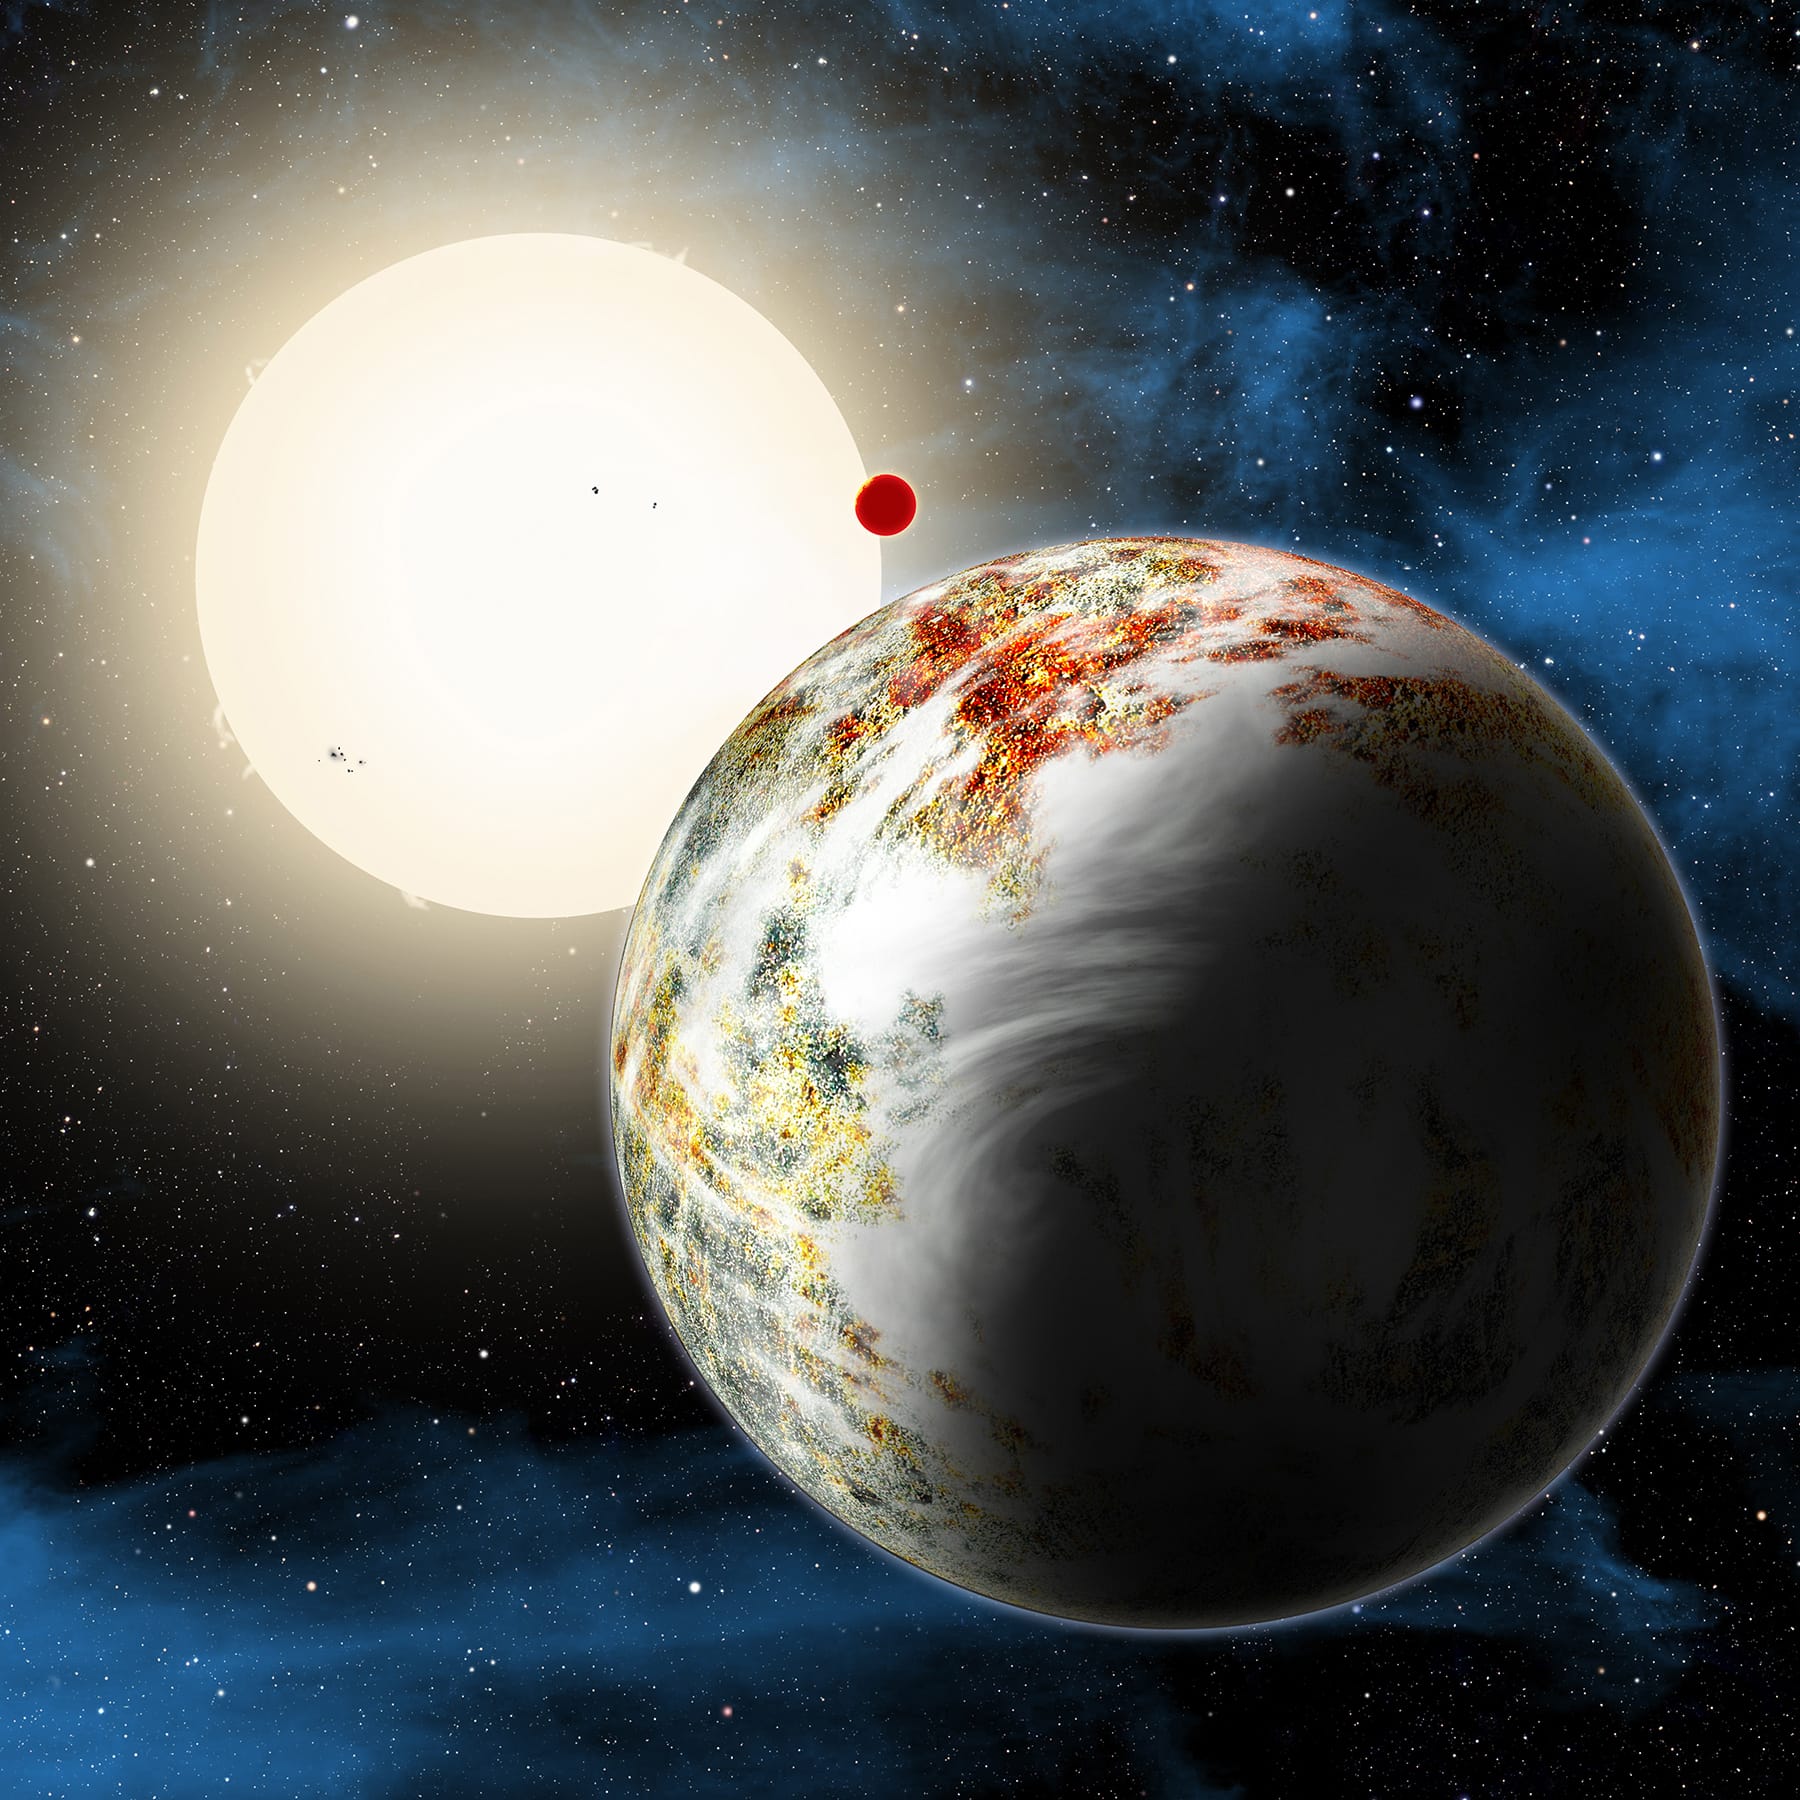 The newly discovered &quot;mega-Earth&quot; Kepler-10c dominates the foreground in this artist's conception.